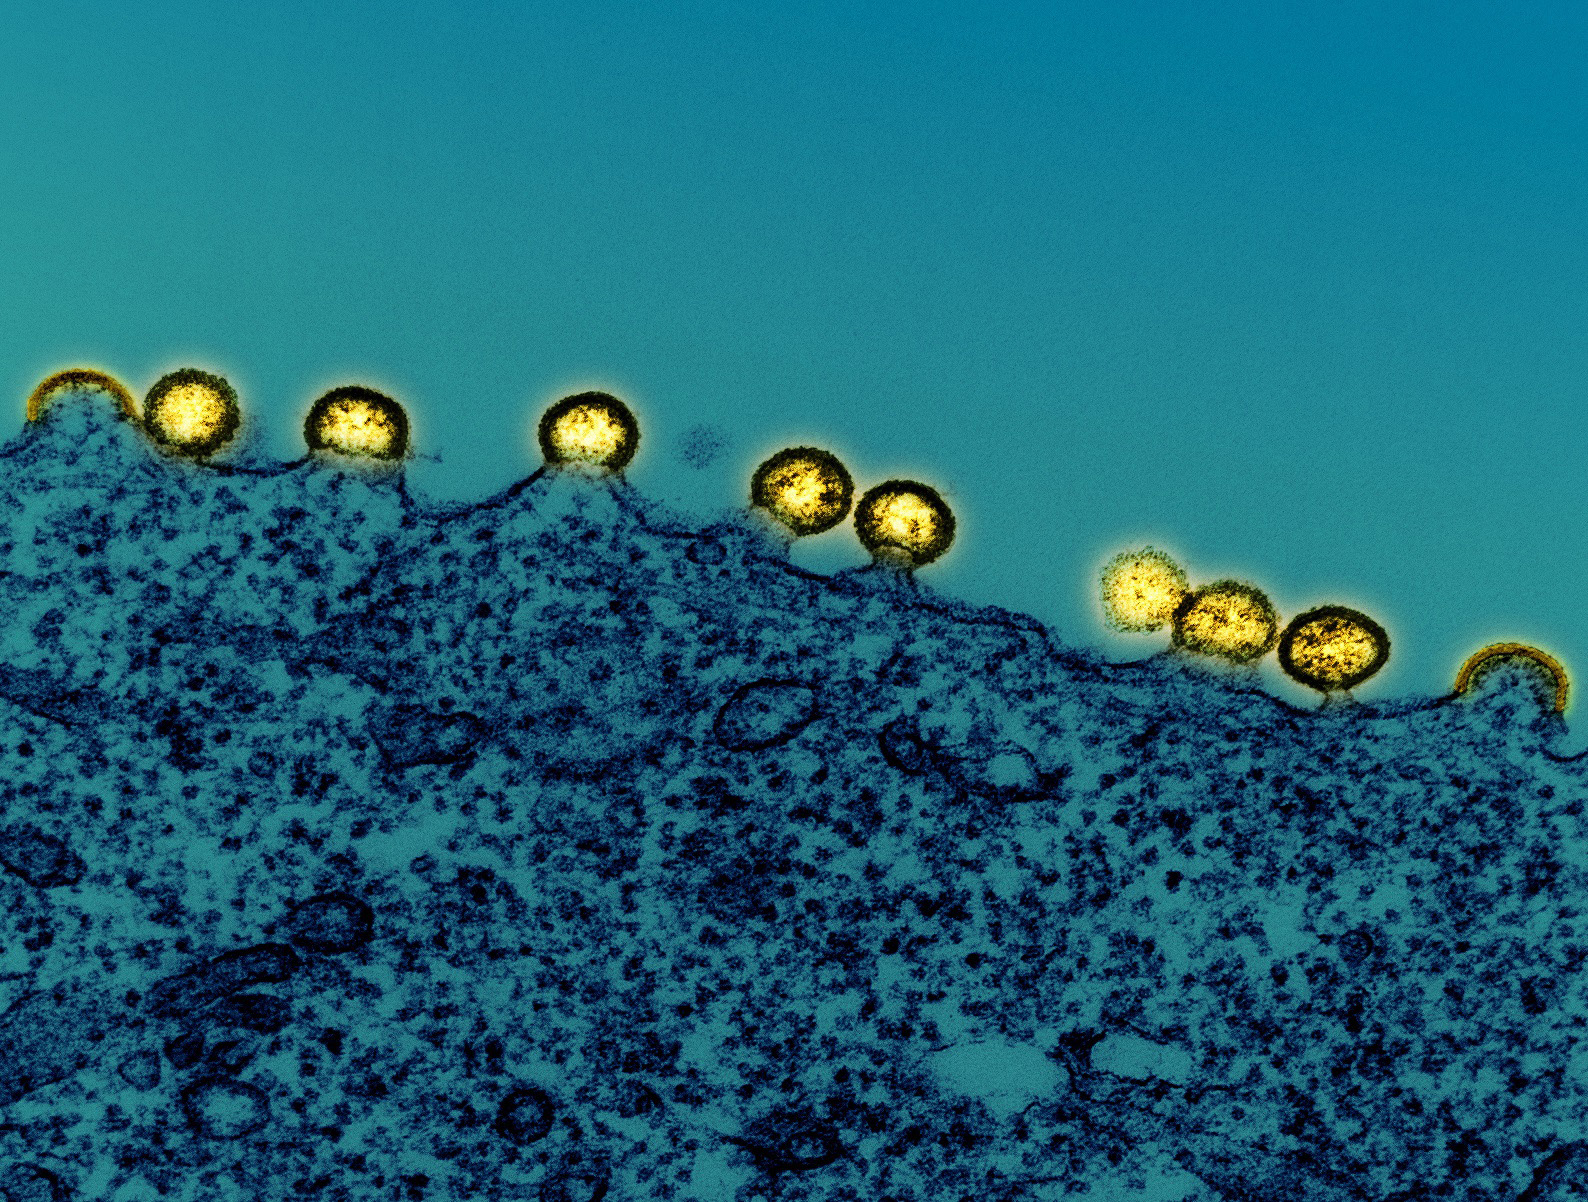 Microscope image of HIV particles replicating from an H9 T cell.